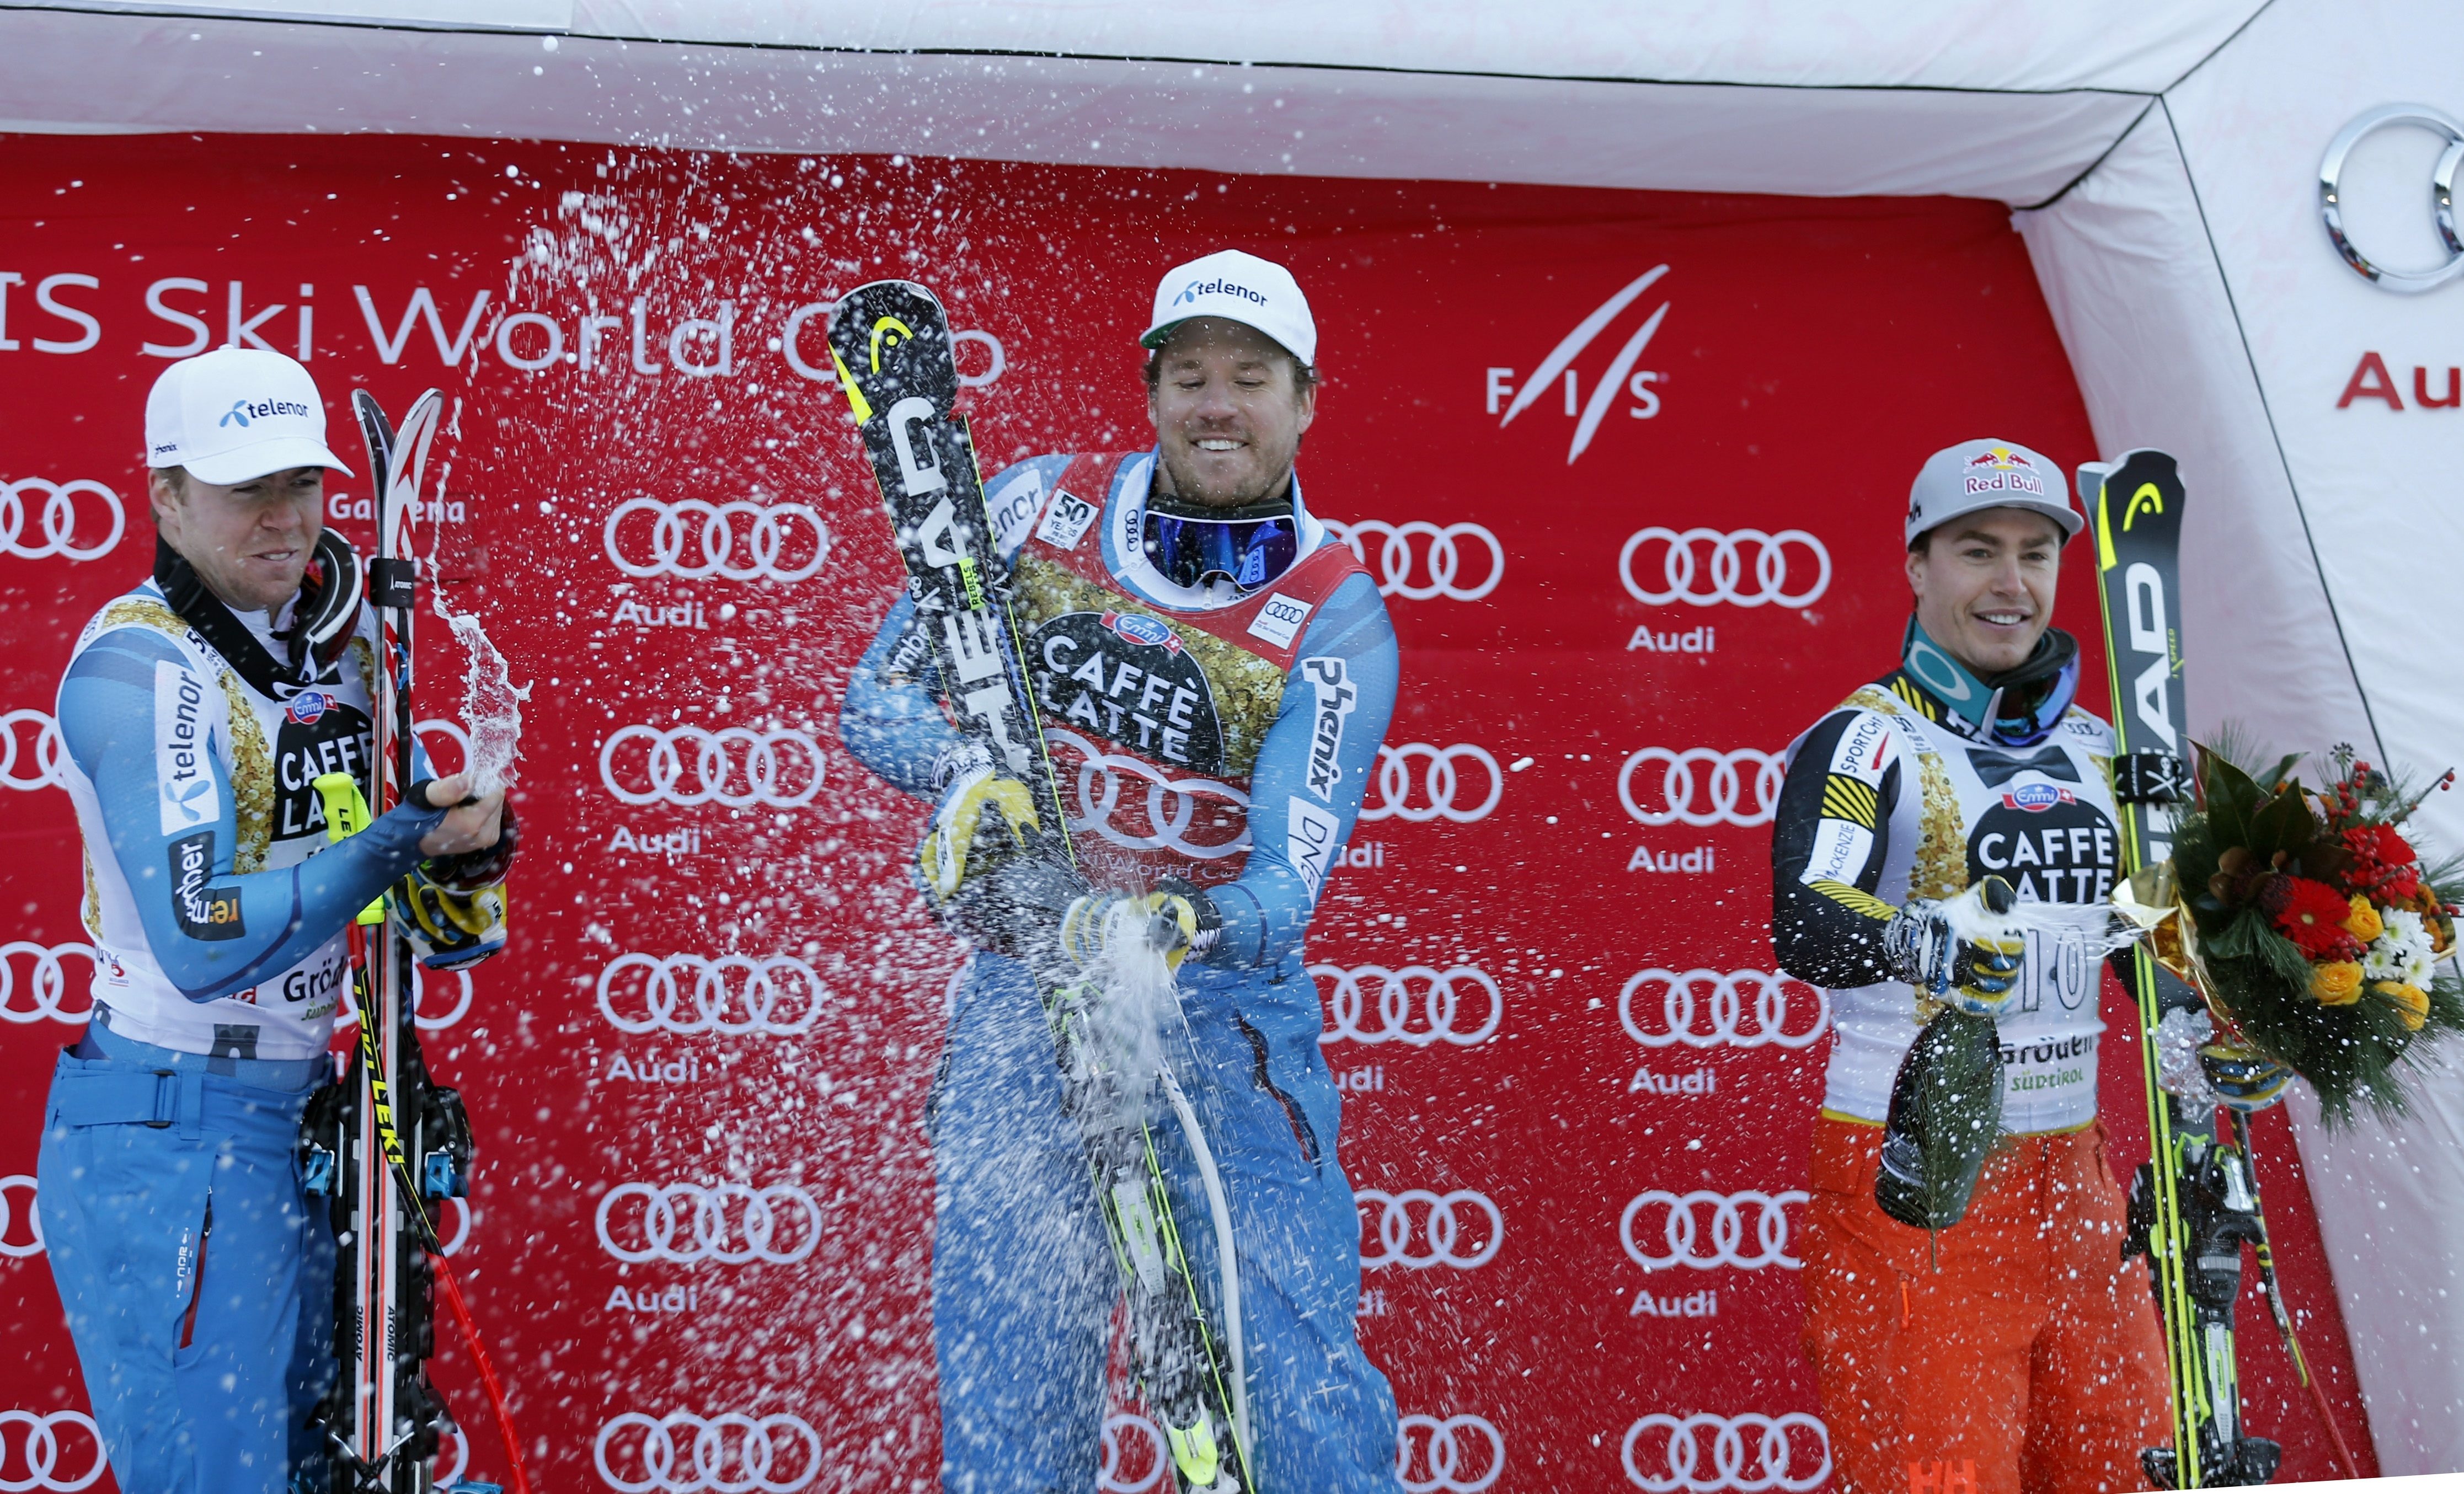 Norway's Kjetil Jansrud, center, winner of an alpine ski, men's World Cup super-G, celebrates on the podium with second placed Norway's Aleksander Aamodt Kilde, left, and third placed Canada's Erik Guay, in Val Gardena, Italy, Friday, Dec. 16, 2016. (AP Photo/Marco Trovati)